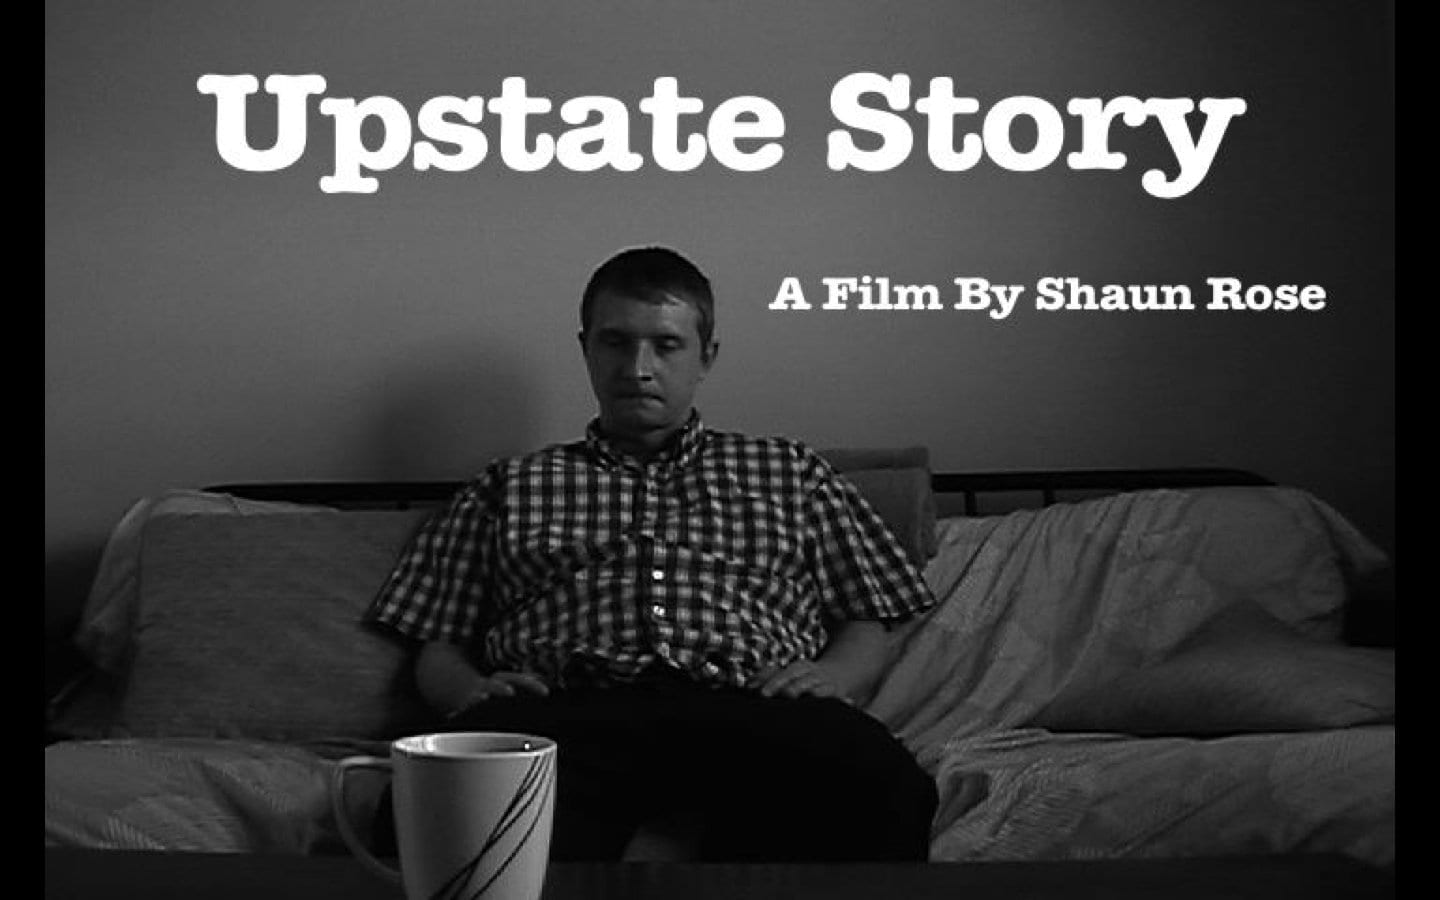 Upstate Story from Shaun Rose on Mother of Movies